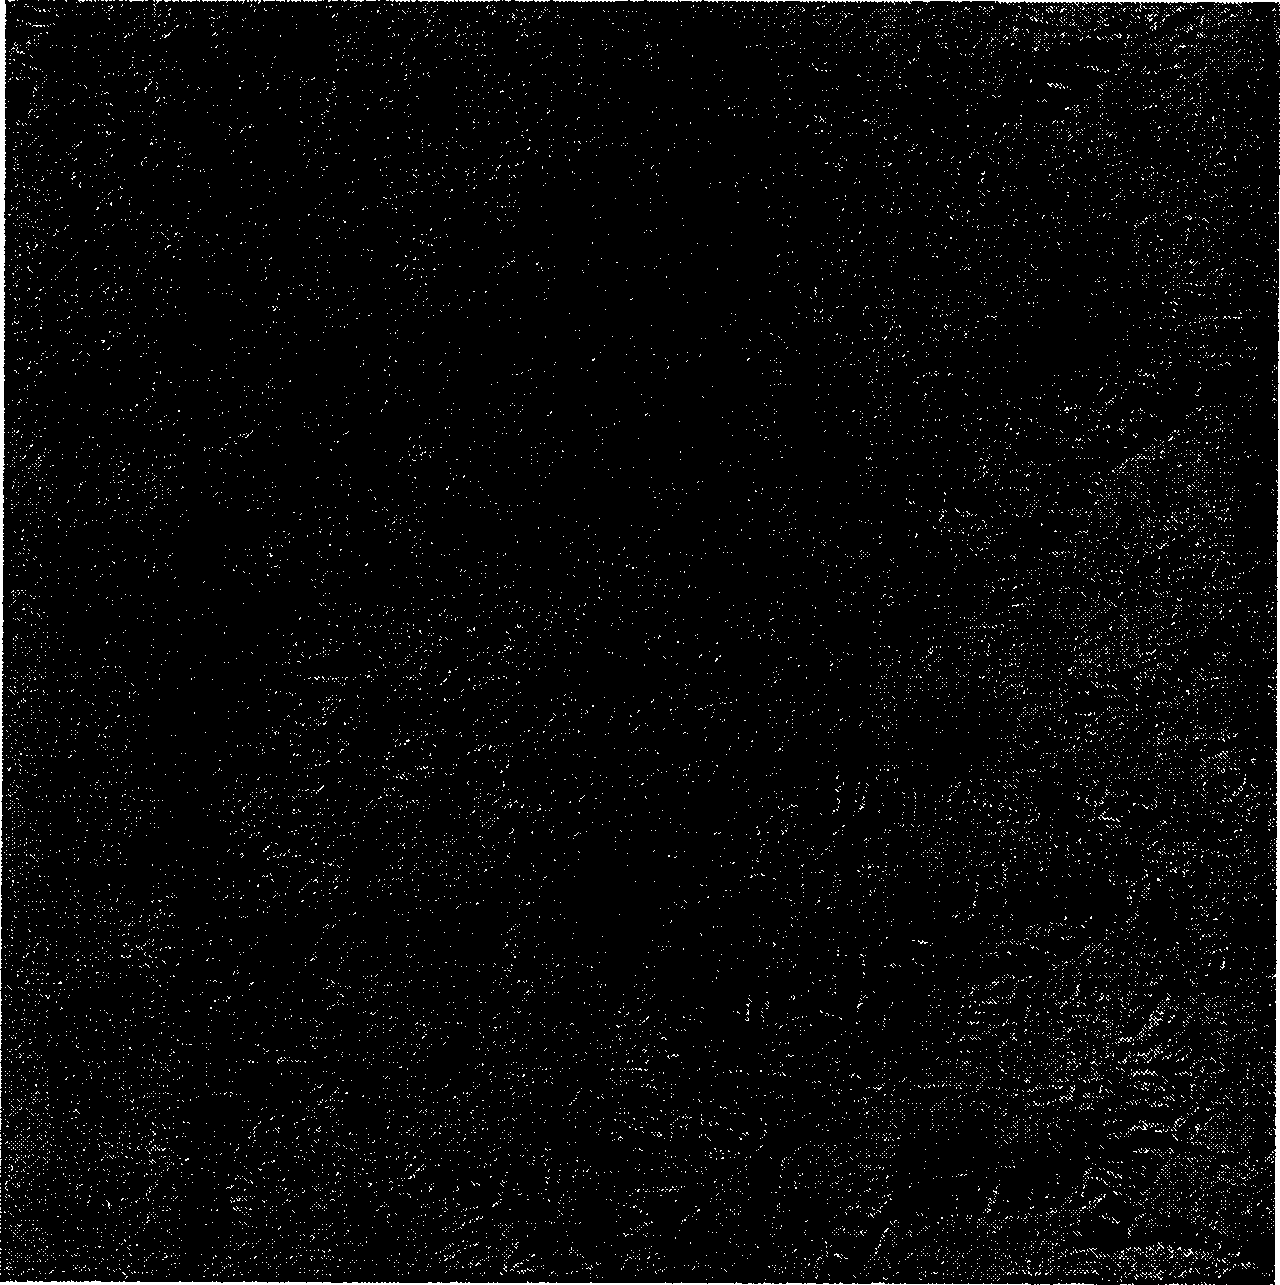 Computerized generation method for sunlight normalized distribution image on rough ground